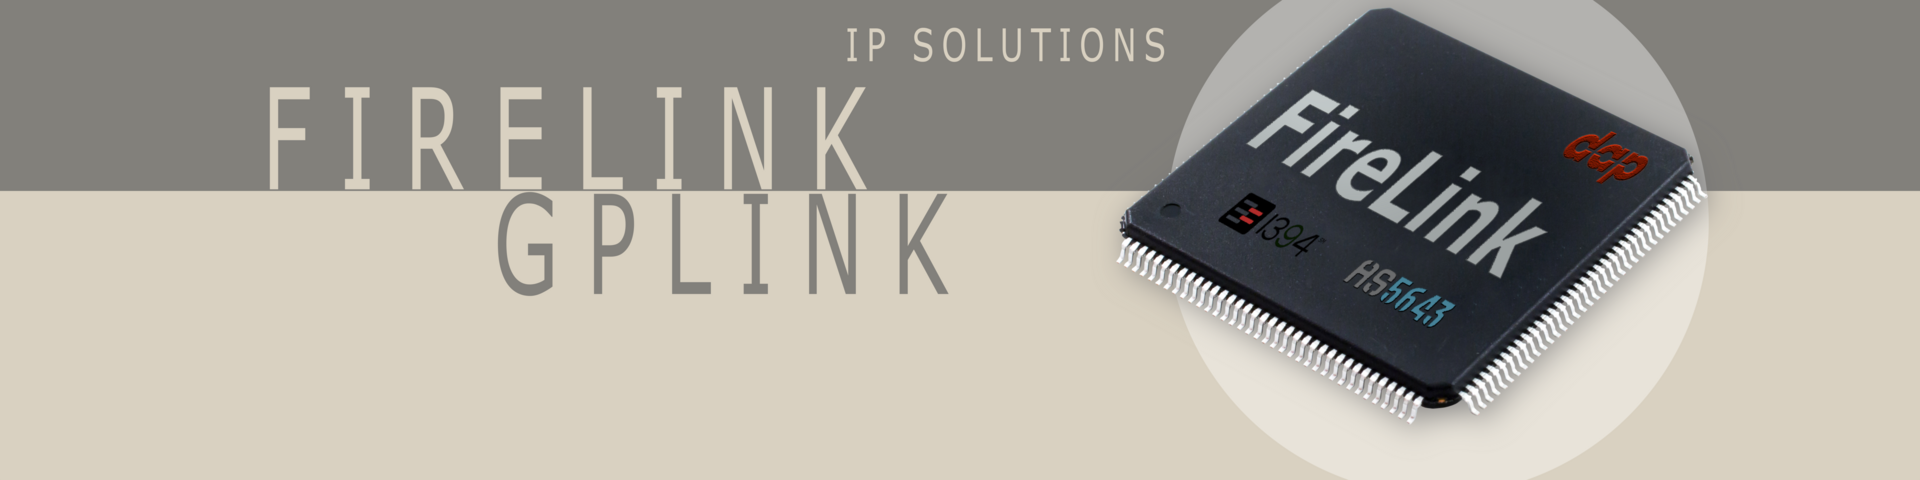 1394 and AS5643 IP Core solutions - FireLink GPLink